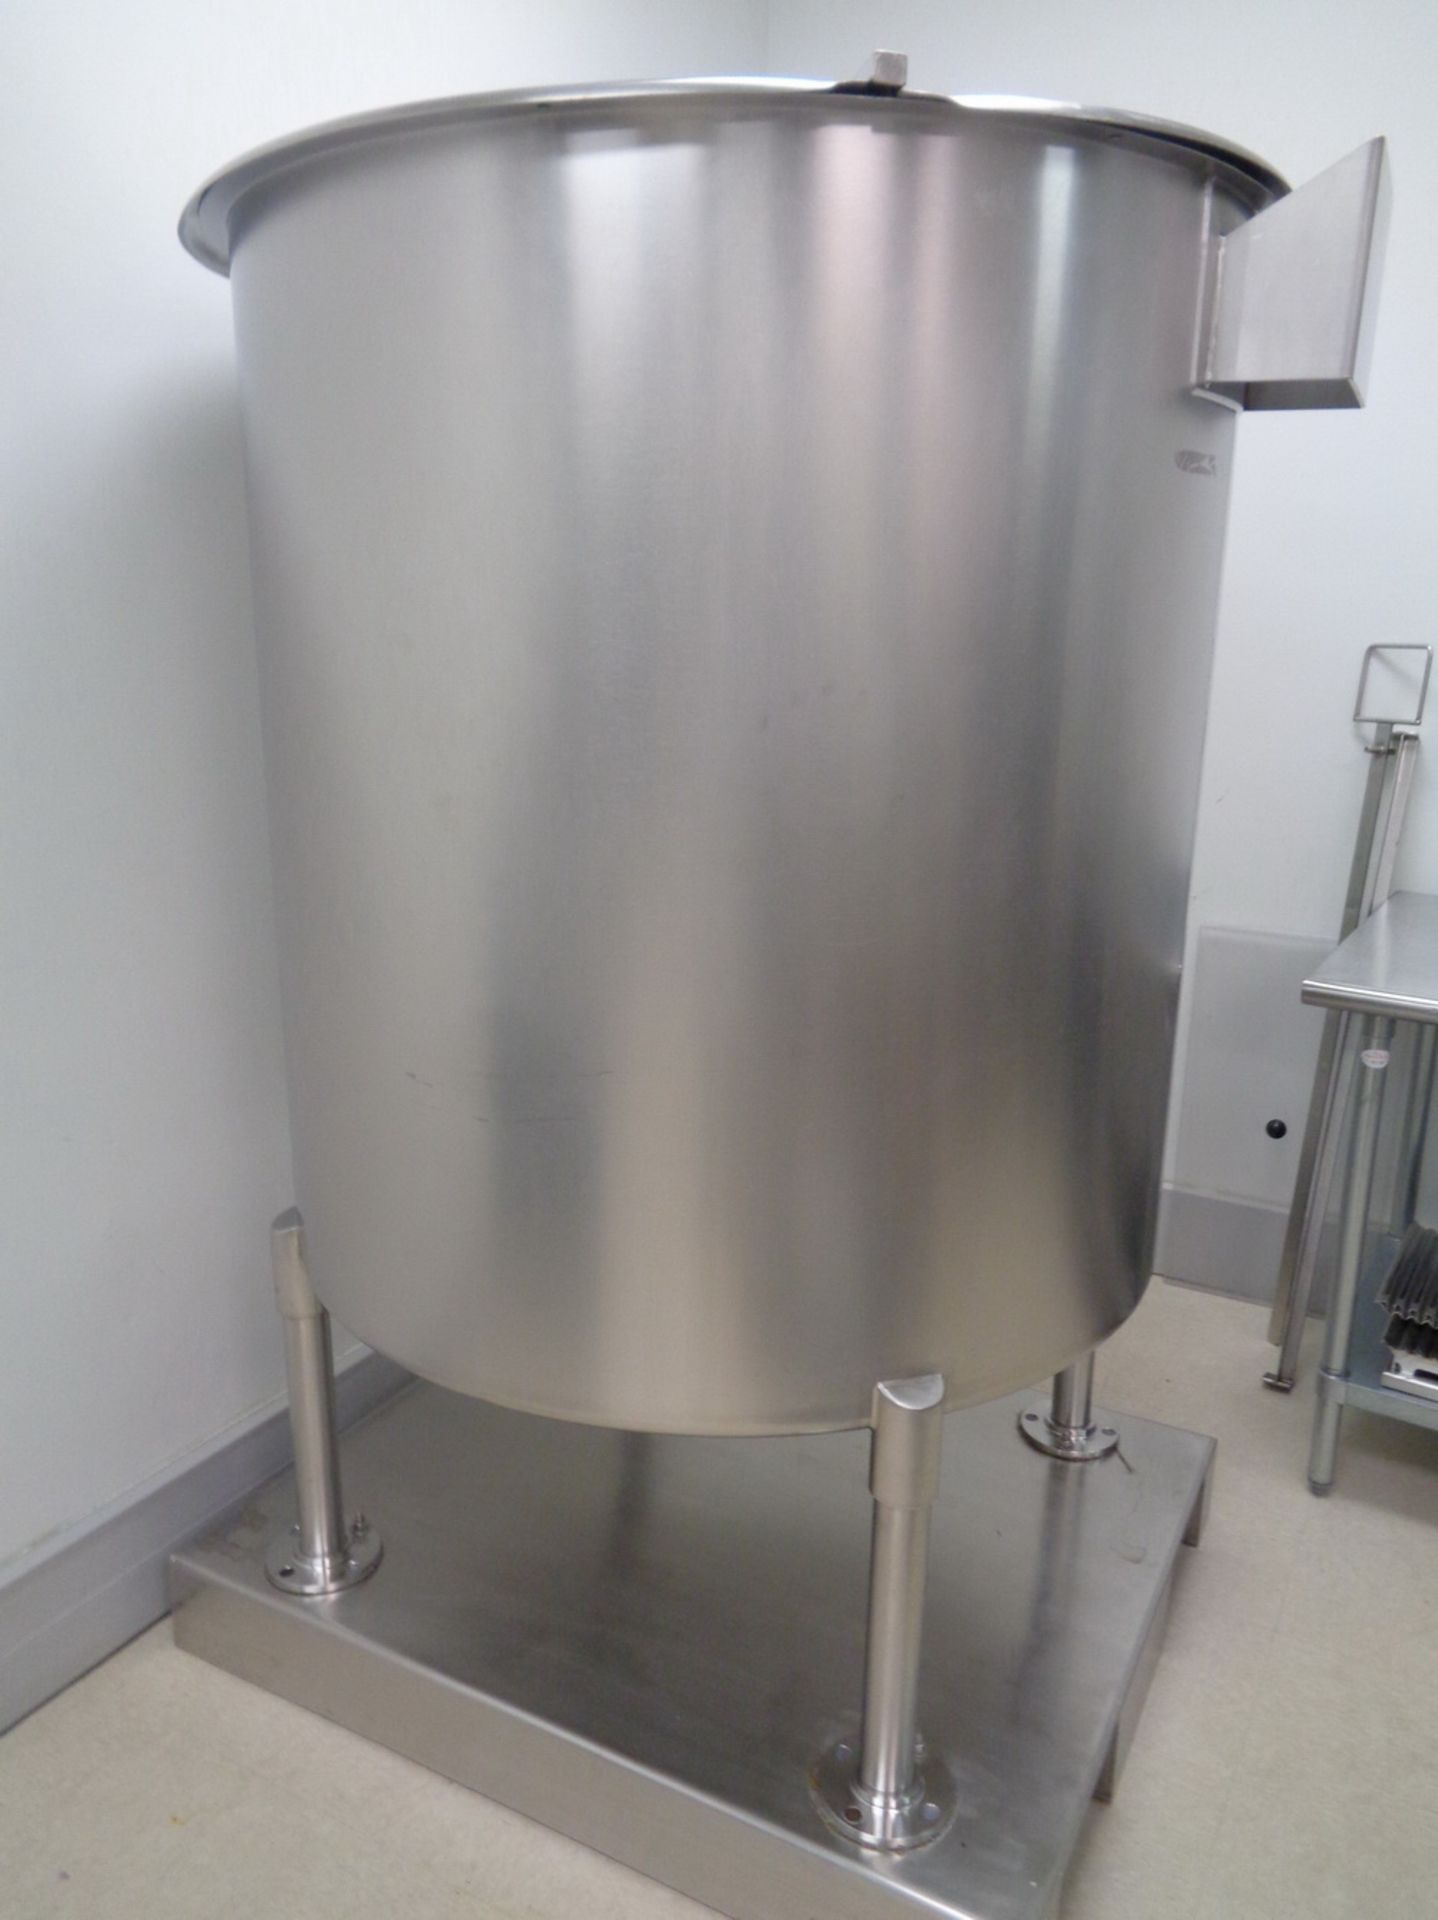 G&W 300 GAL CAPACITY STAINLESS STEEL TANK, SERIAL NUMBER T-96-13593. WITH DISH BOTTOM - Image 2 of 6